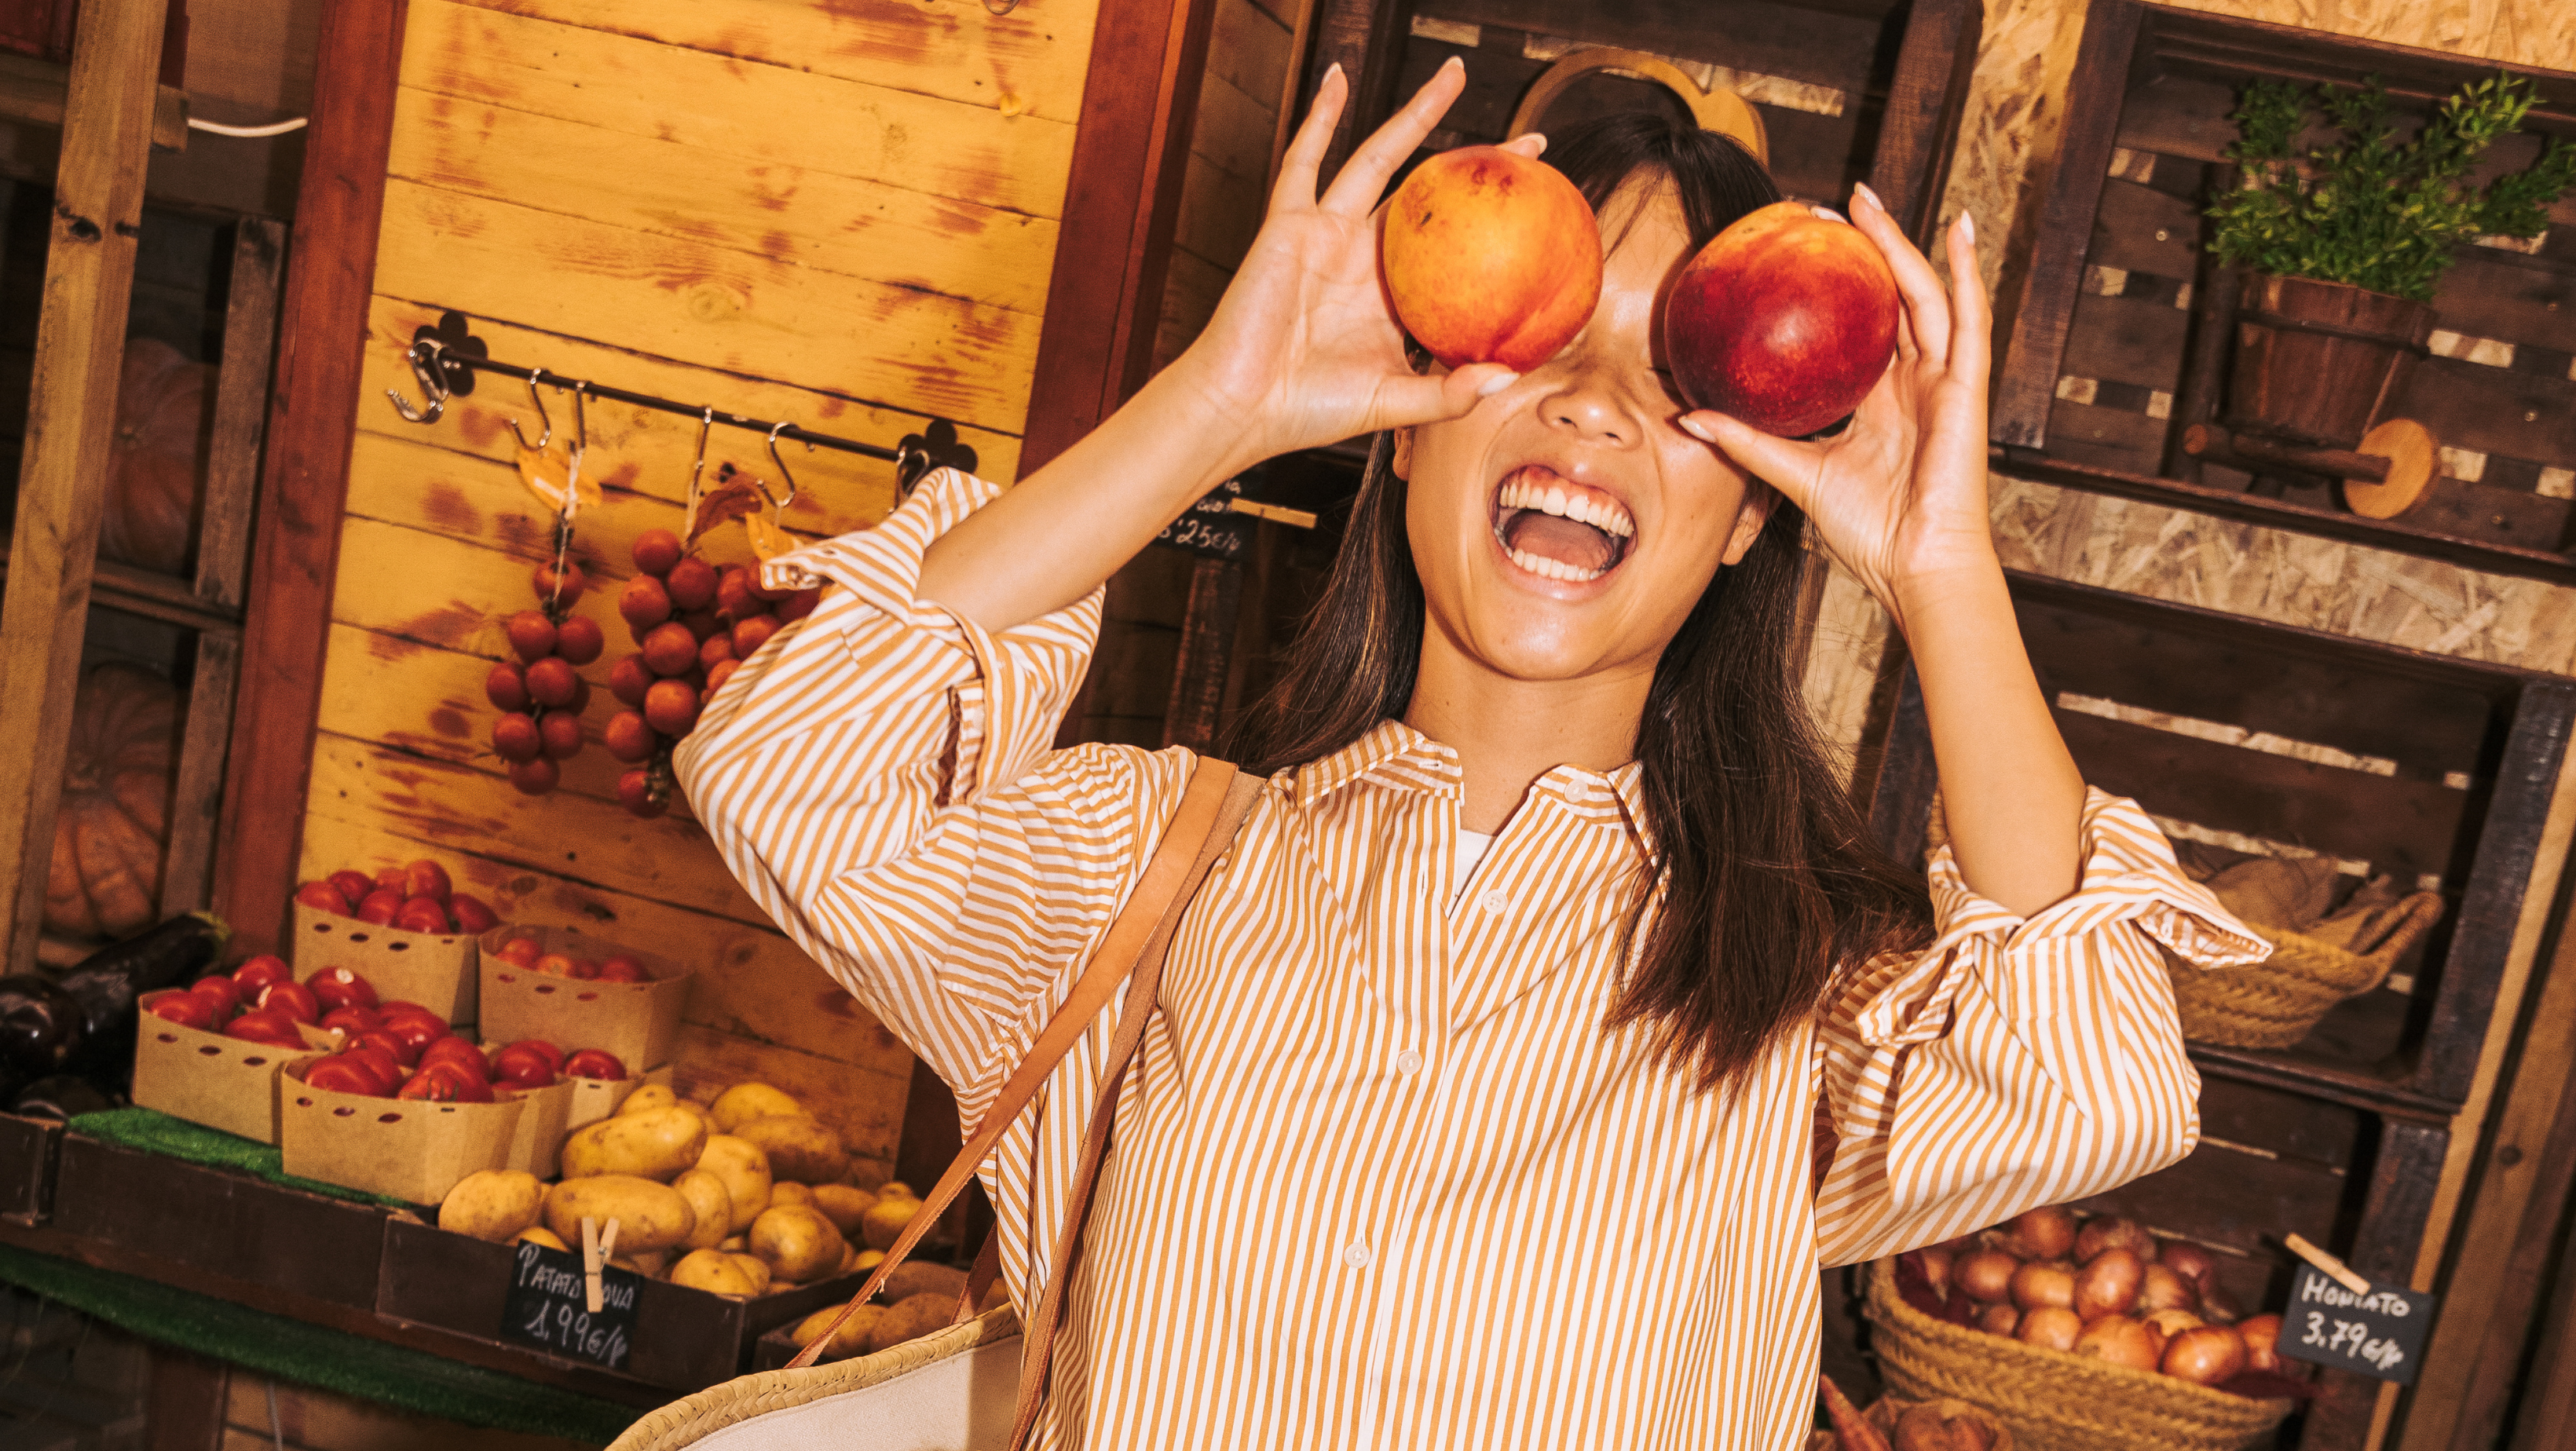 A young woman at a produce market laughs and holds two nectarines in front of her eyes as a joke